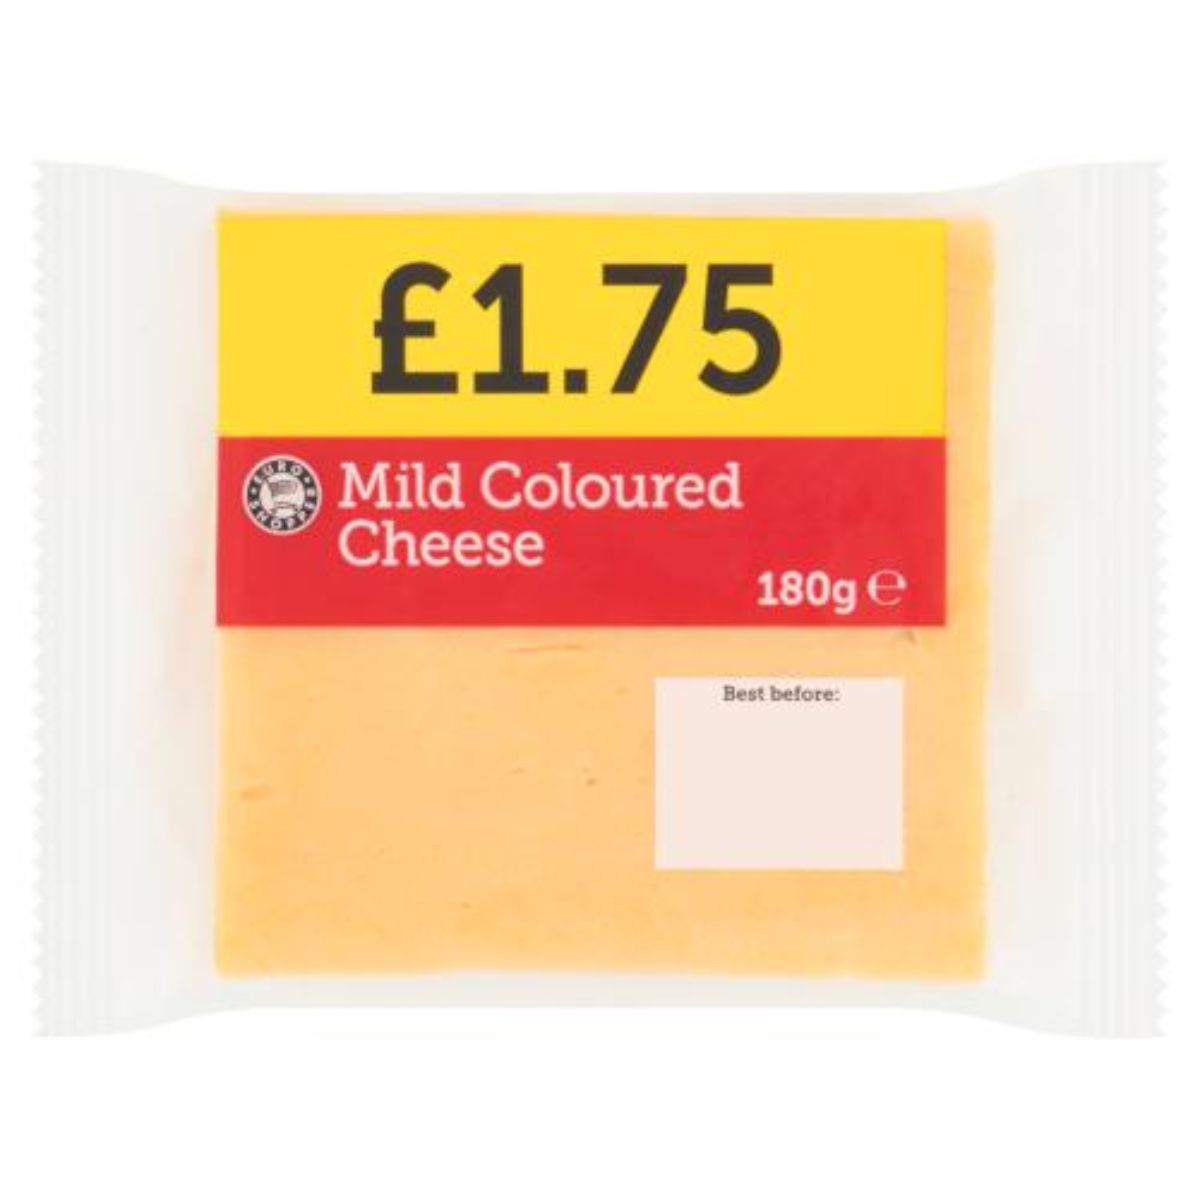 Replace: mid-coloured cheese
With: Euro Shopper - Mild Coloured Cheese - 180g